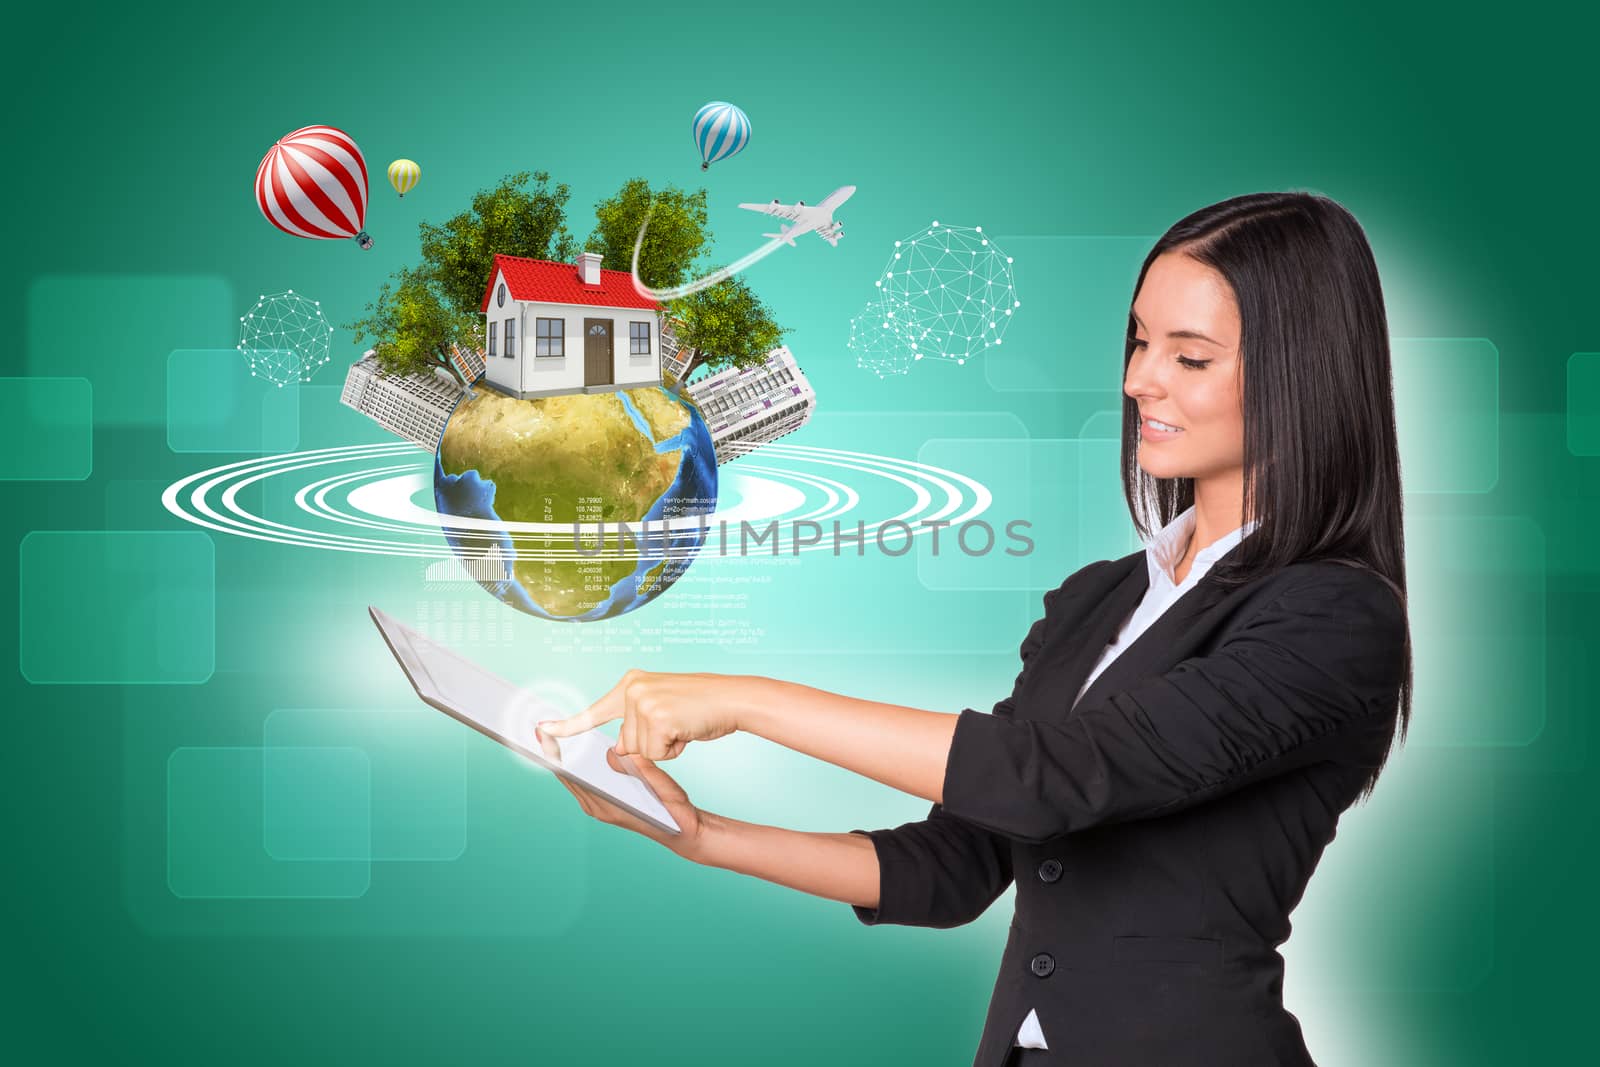 Beautiful businesswomen in suit using digital tablet. Earth with house, buildings, air balloons, trees and airplane. Element of this image furnished by NASA